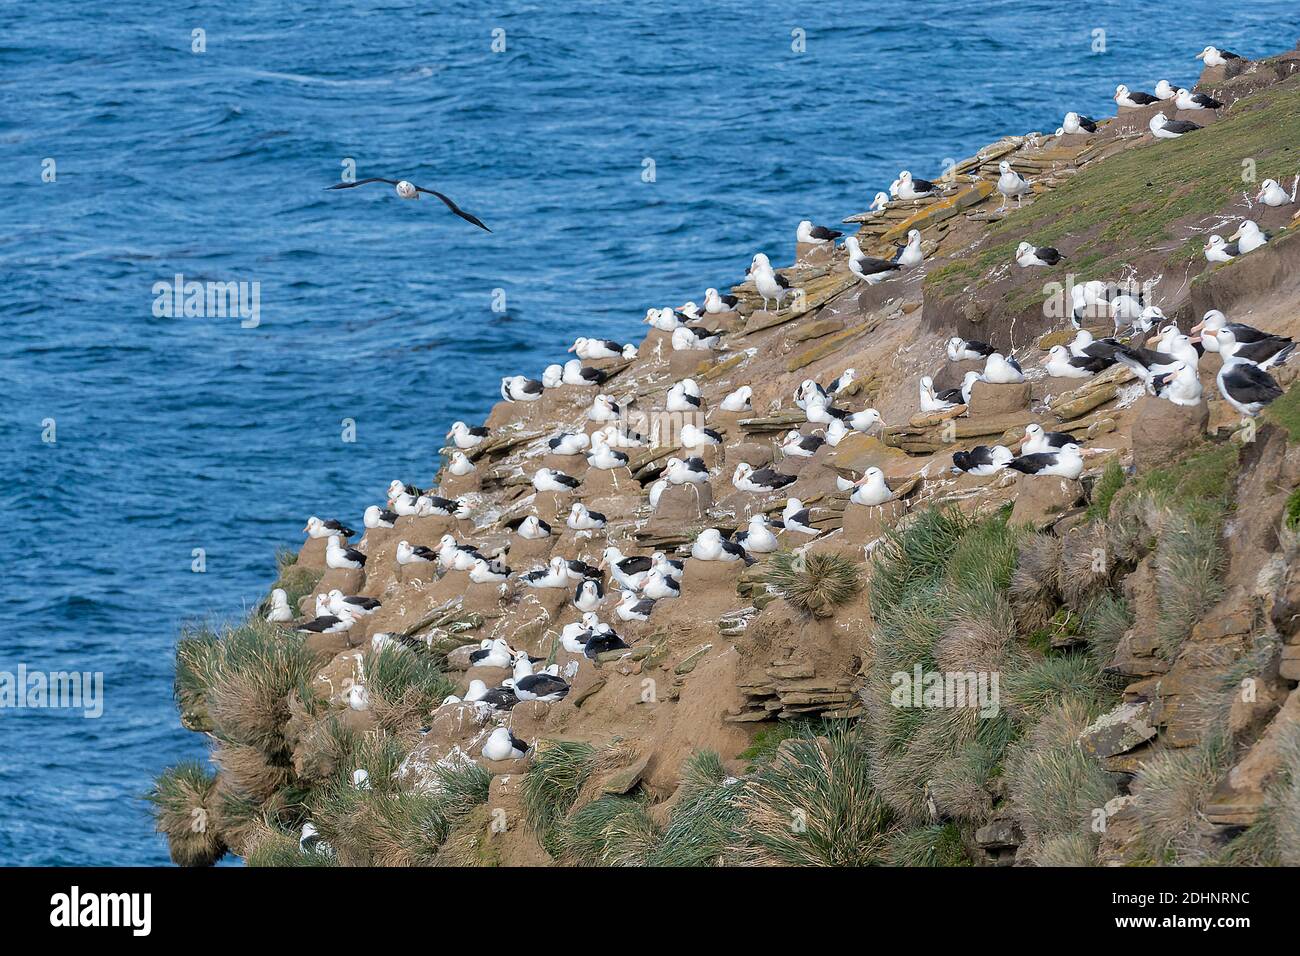 Colony of black-browed albatross (Thalassarche melanophrys) nesting at Saunders Island (close to Rockery cabin), the Falkland Islands. Stock Photo